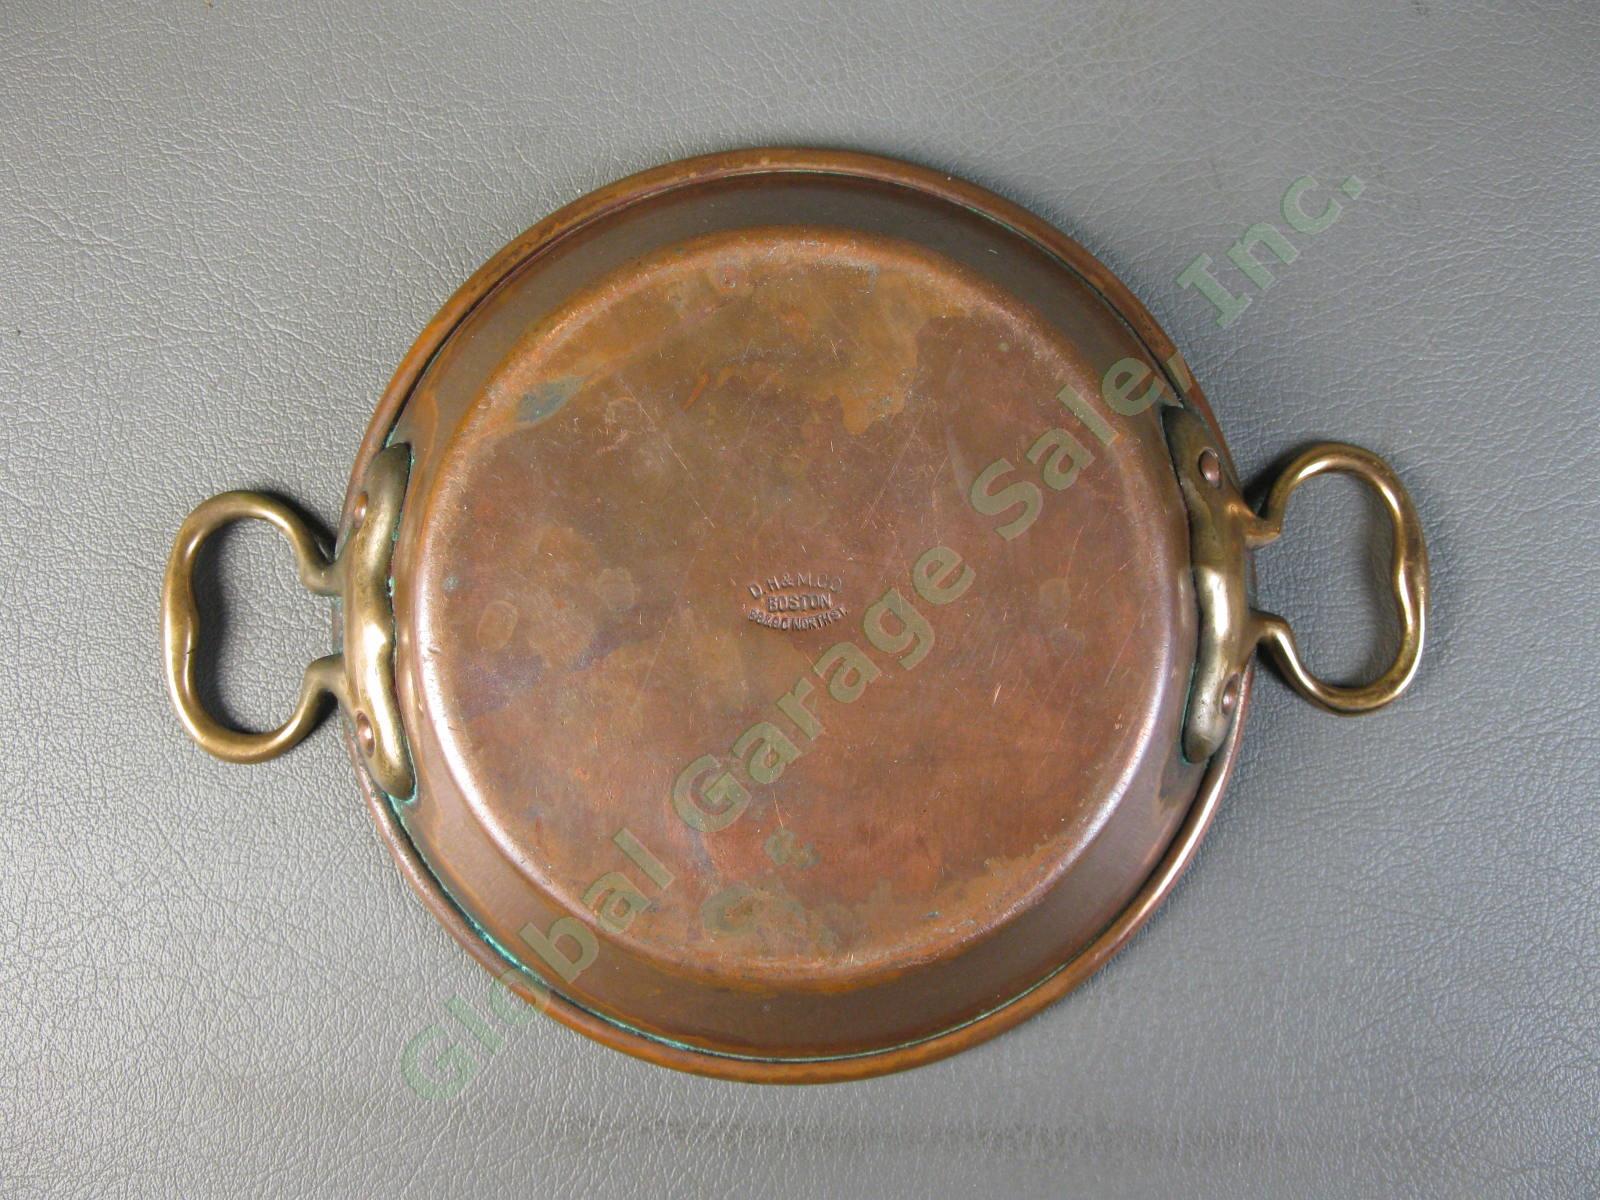 Antique DH&M Duparquet Huot Moneuse French Chef Copper Fry Frying Skillet Pan NR 3